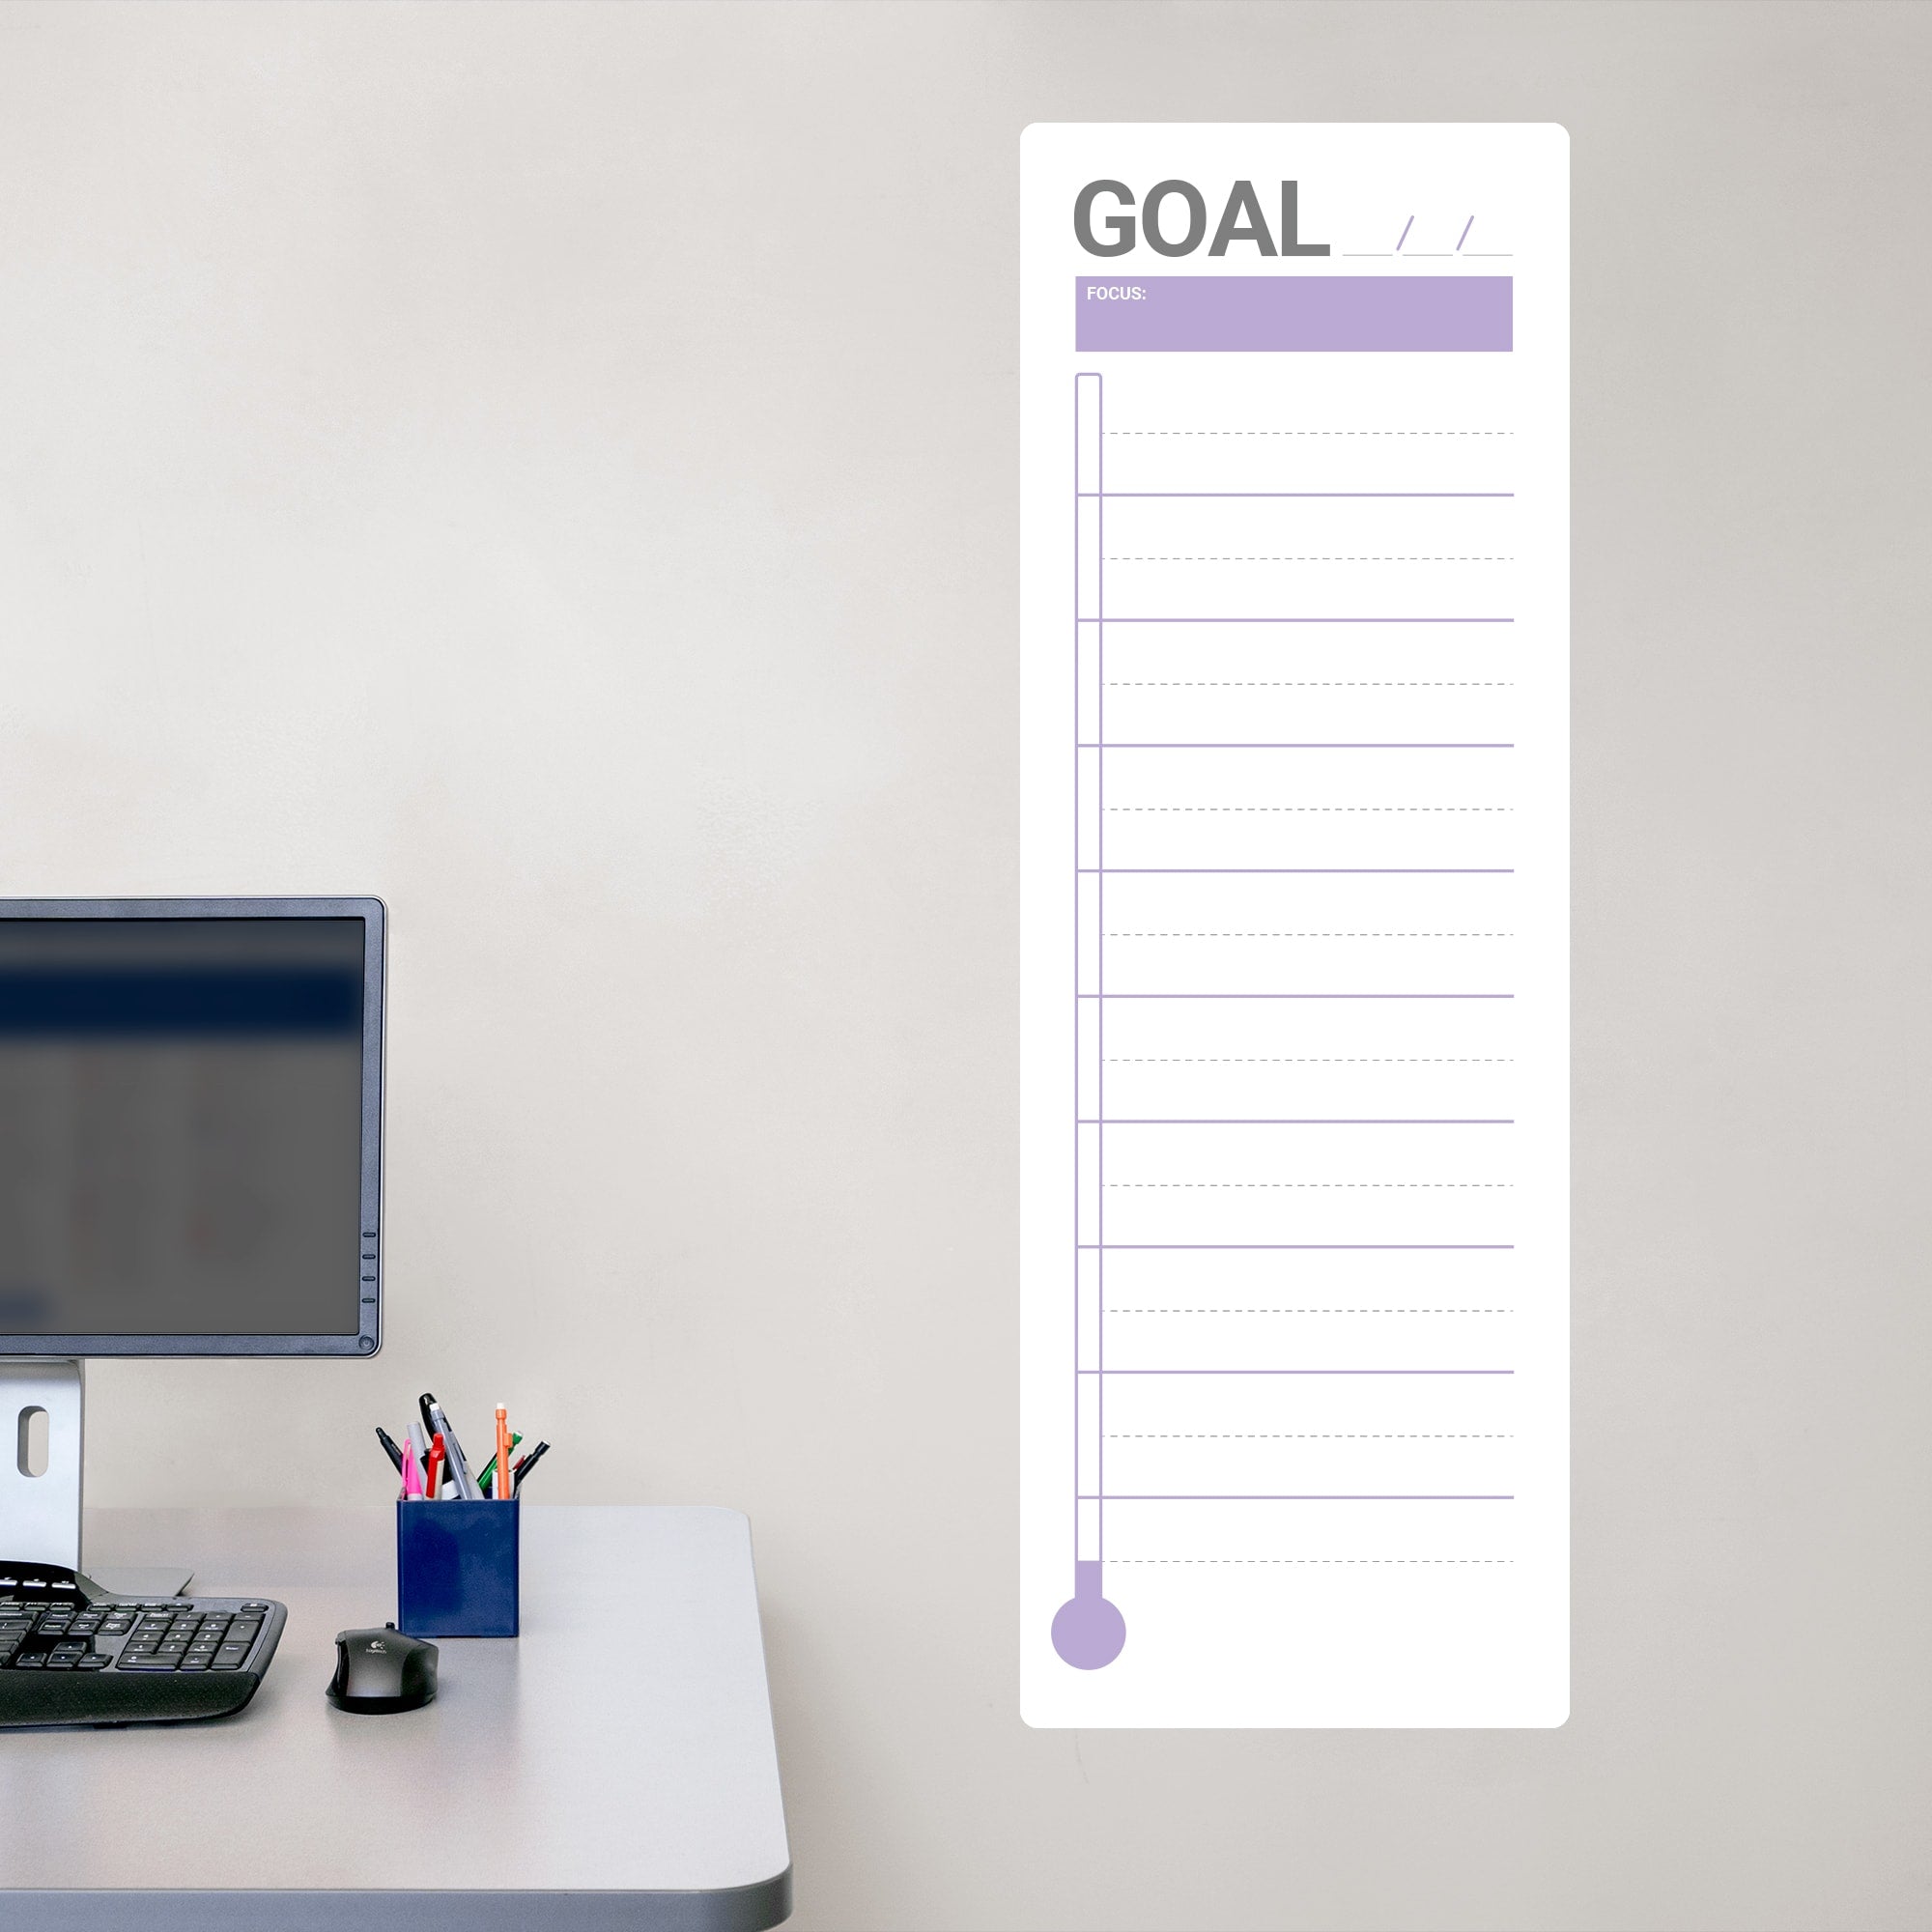 Goal Thermometer: Minamalist Design - Removable Dry Erase Vinyl Decal in Purple (42"W x 14"H) by Fathead